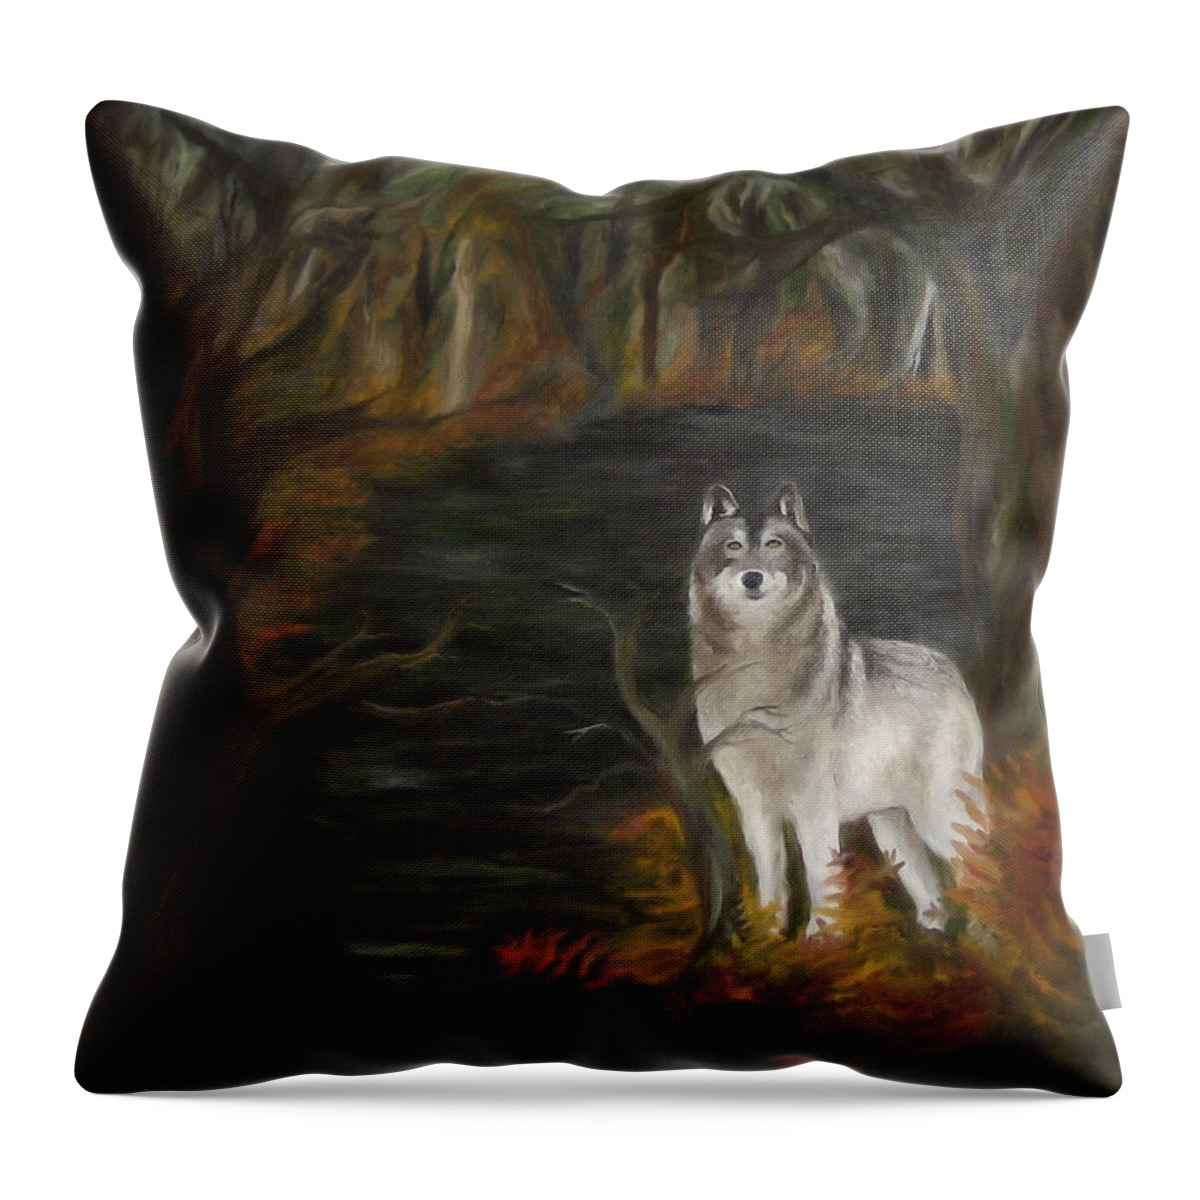 Autumn Throw Pillow featuring the painting Water Dark by FT McKinstry